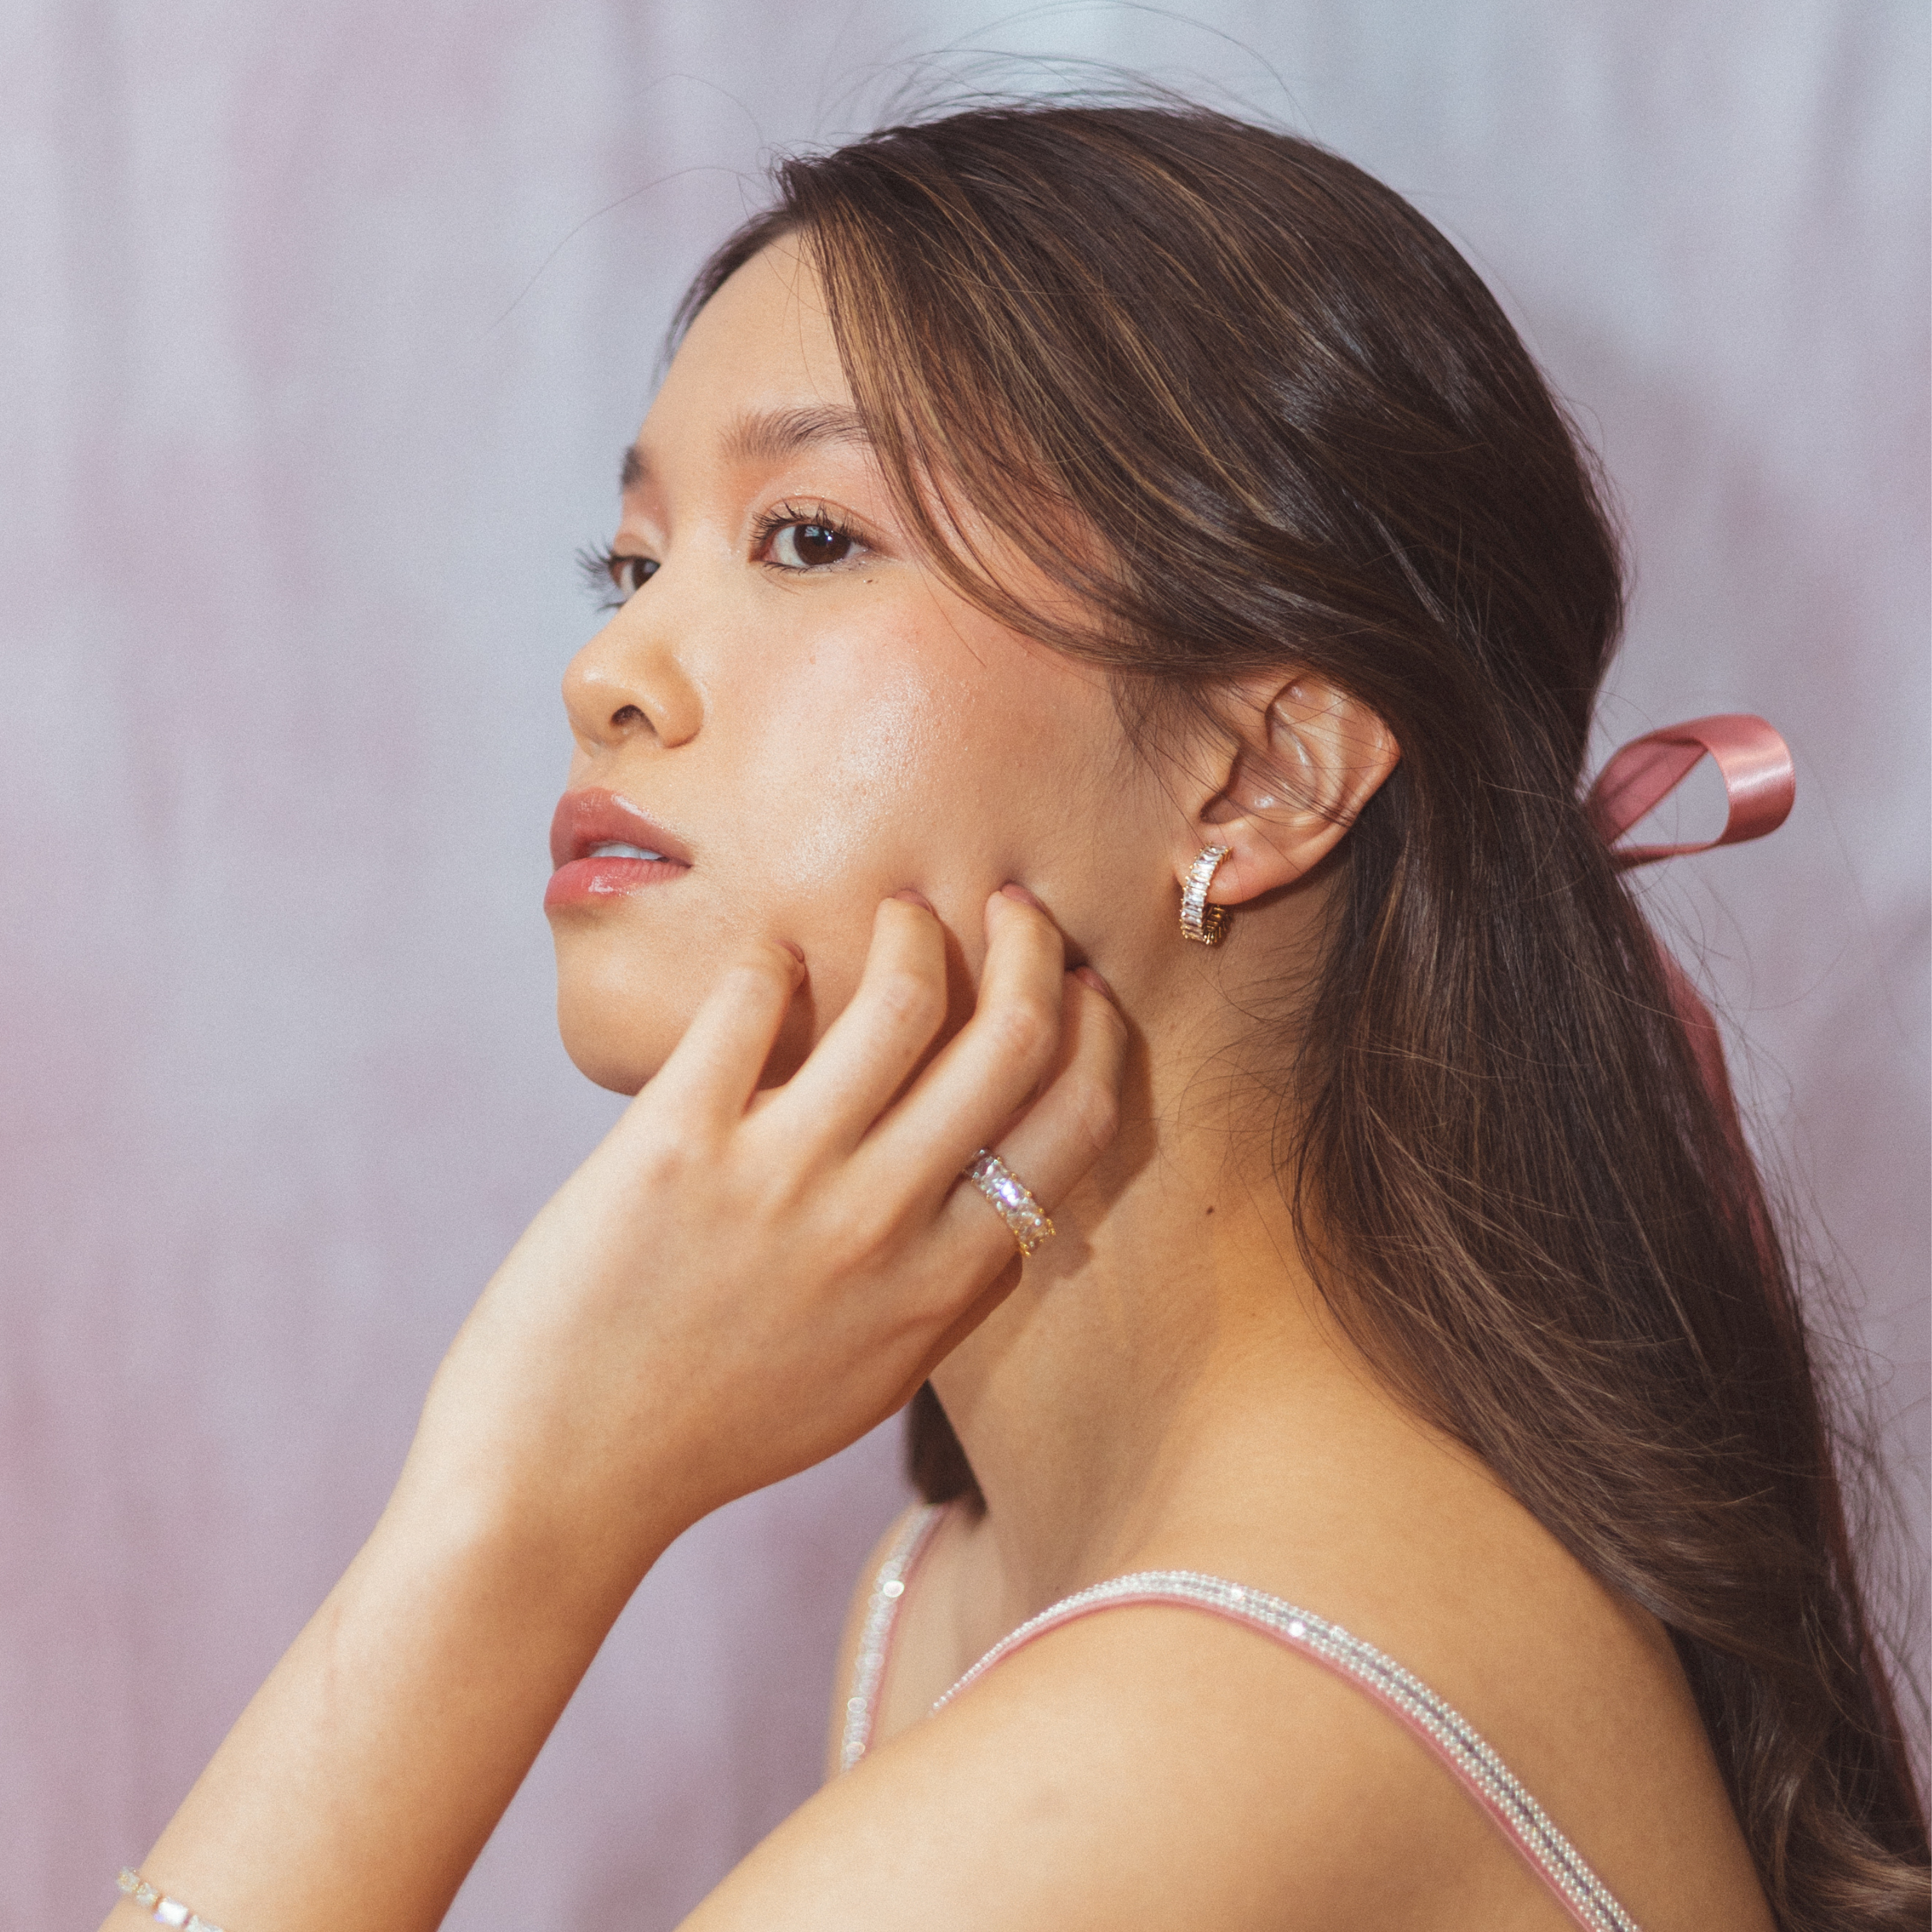 A model wearing the Olivia Clip On Earrings. These elegant earrings provide a secure 24-hour hold and adjustable fit for all types of ears, perfect for sensitive or stretched ears. Elevate your everyday look confidently with Olivia Clip On Earrings, designed for ultimate comfort and style.